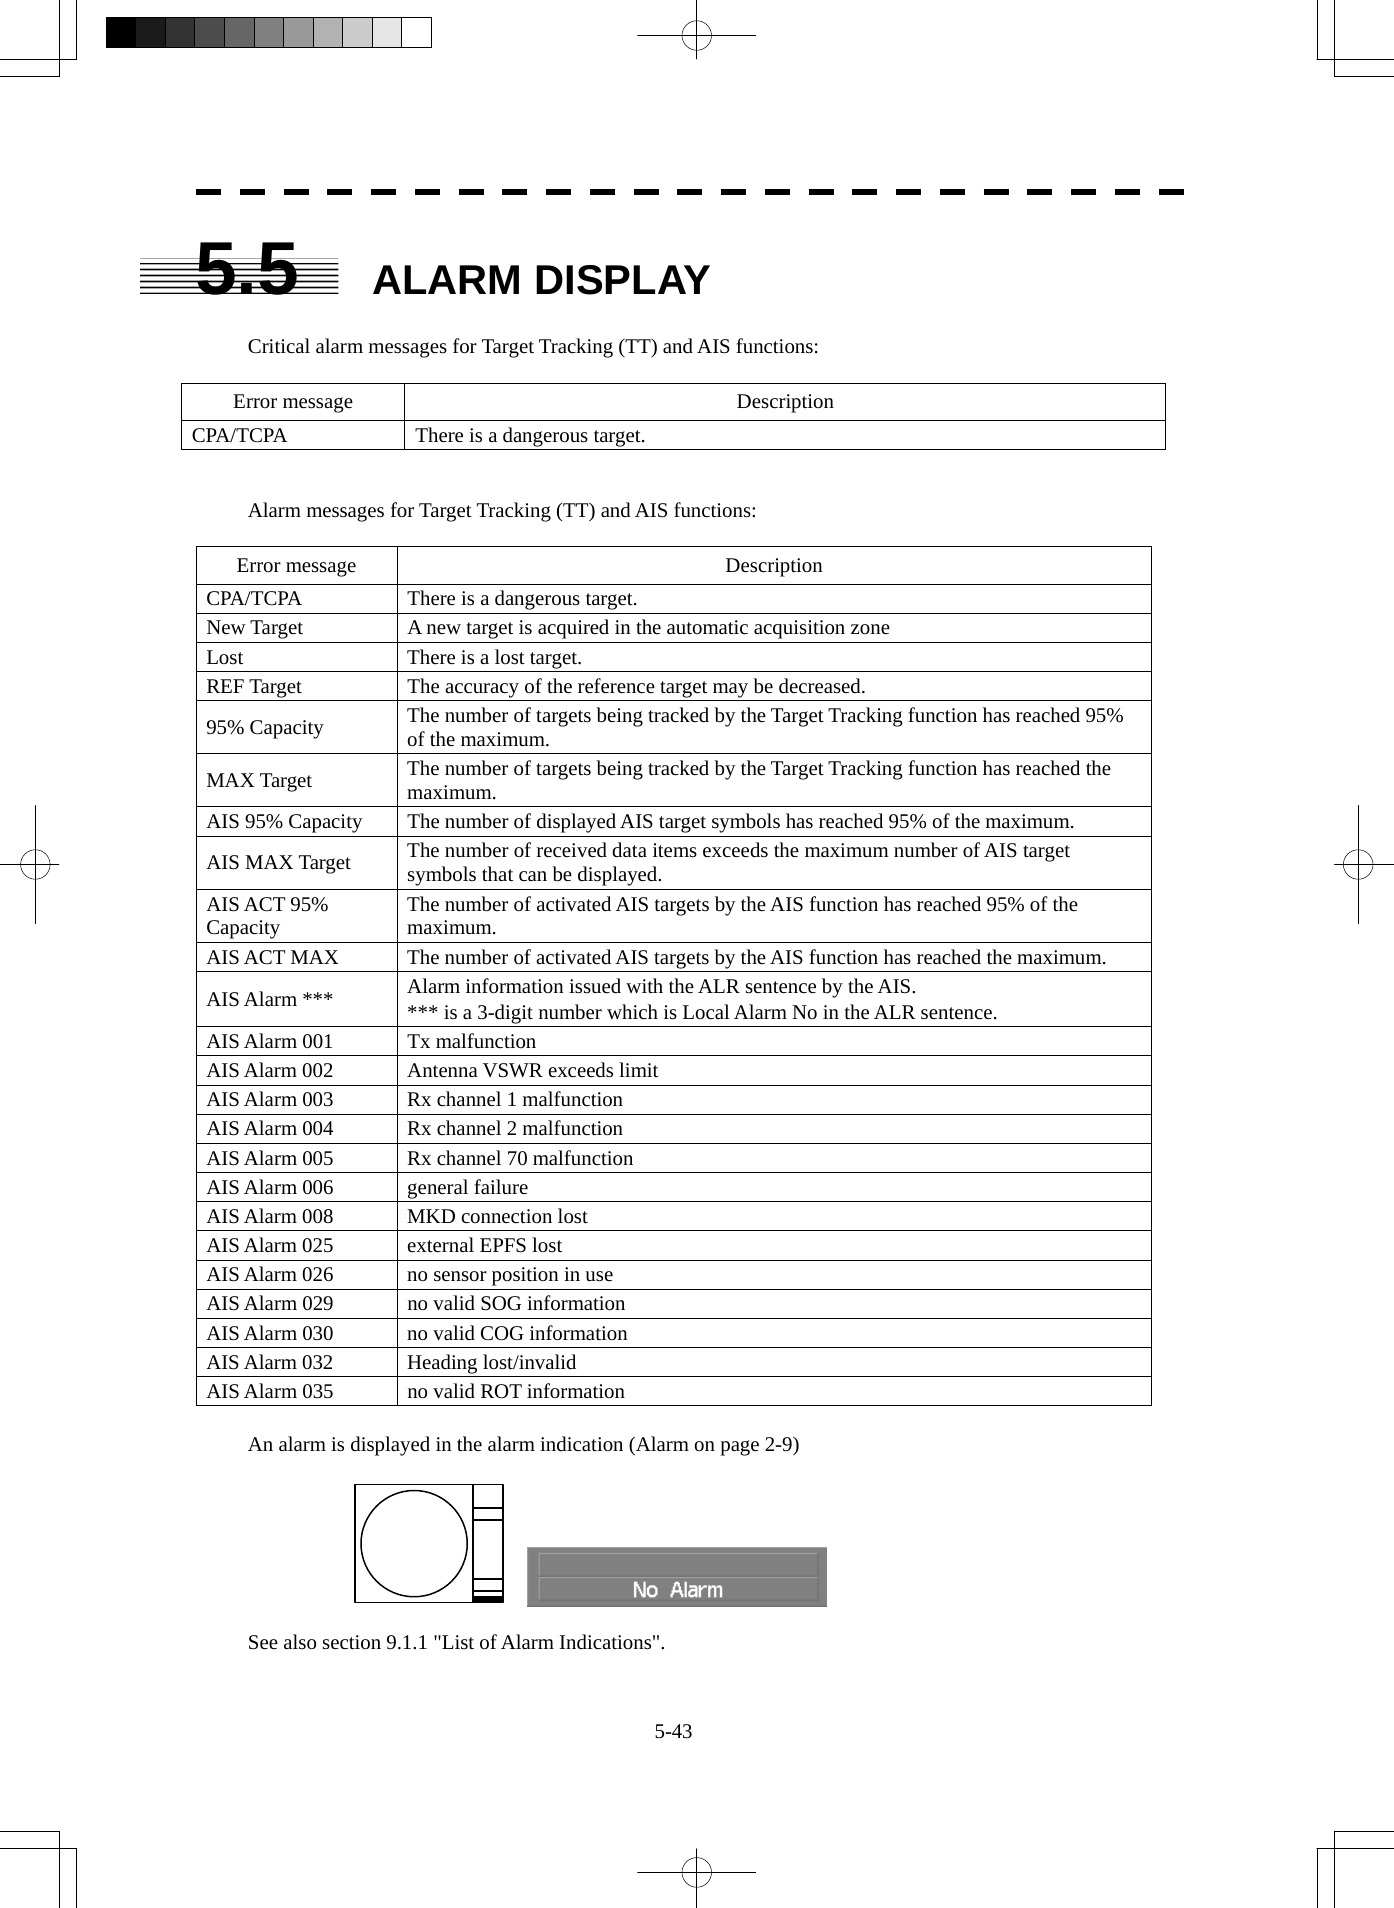  5-43 5.5  ALARM DISPLAY  Critical alarm messages for Target Tracking (TT) and AIS functions:  Error message  Description CPA/TCPA  There is a dangerous target.   Alarm messages for Target Tracking (TT) and AIS functions:  Error message  Description CPA/TCPA  There is a dangerous target. New Target  A new target is acquired in the automatic acquisition zone Lost  There is a lost target. REF Target  The accuracy of the reference target may be decreased. 95% Capacity  The number of targets being tracked by the Target Tracking function has reached 95% of the maximum. MAX Target  The number of targets being tracked by the Target Tracking function has reached the maximum. AIS 95% Capacity  The number of displayed AIS target symbols has reached 95% of the maximum. AIS MAX Target  The number of received data items exceeds the maximum number of AIS target symbols that can be displayed. AIS ACT 95% Capacity  The number of activated AIS targets by the AIS function has reached 95% of the maximum. AIS ACT MAX  The number of activated AIS targets by the AIS function has reached the maximum. AIS Alarm ***  Alarm information issued with the ALR sentence by the AIS. *** is a 3-digit number which is Local Alarm No in the ALR sentence. AIS Alarm 001  Tx malfunction AIS Alarm 002  Antenna VSWR exceeds limit AIS Alarm 003  Rx channel 1 malfunction AIS Alarm 004  Rx channel 2 malfunction AIS Alarm 005  Rx channel 70 malfunction AIS Alarm 006  general failure AIS Alarm 008  MKD connection lost AIS Alarm 025  external EPFS lost AIS Alarm 026  no sensor position in use AIS Alarm 029  no valid SOG information AIS Alarm 030  no valid COG information AIS Alarm 032  Heading lost/invalid AIS Alarm 035  no valid ROT information  An alarm is displayed in the alarm indication (Alarm on page 2-9)       See also section 9.1.1 &quot;List of Alarm Indications&quot;. 